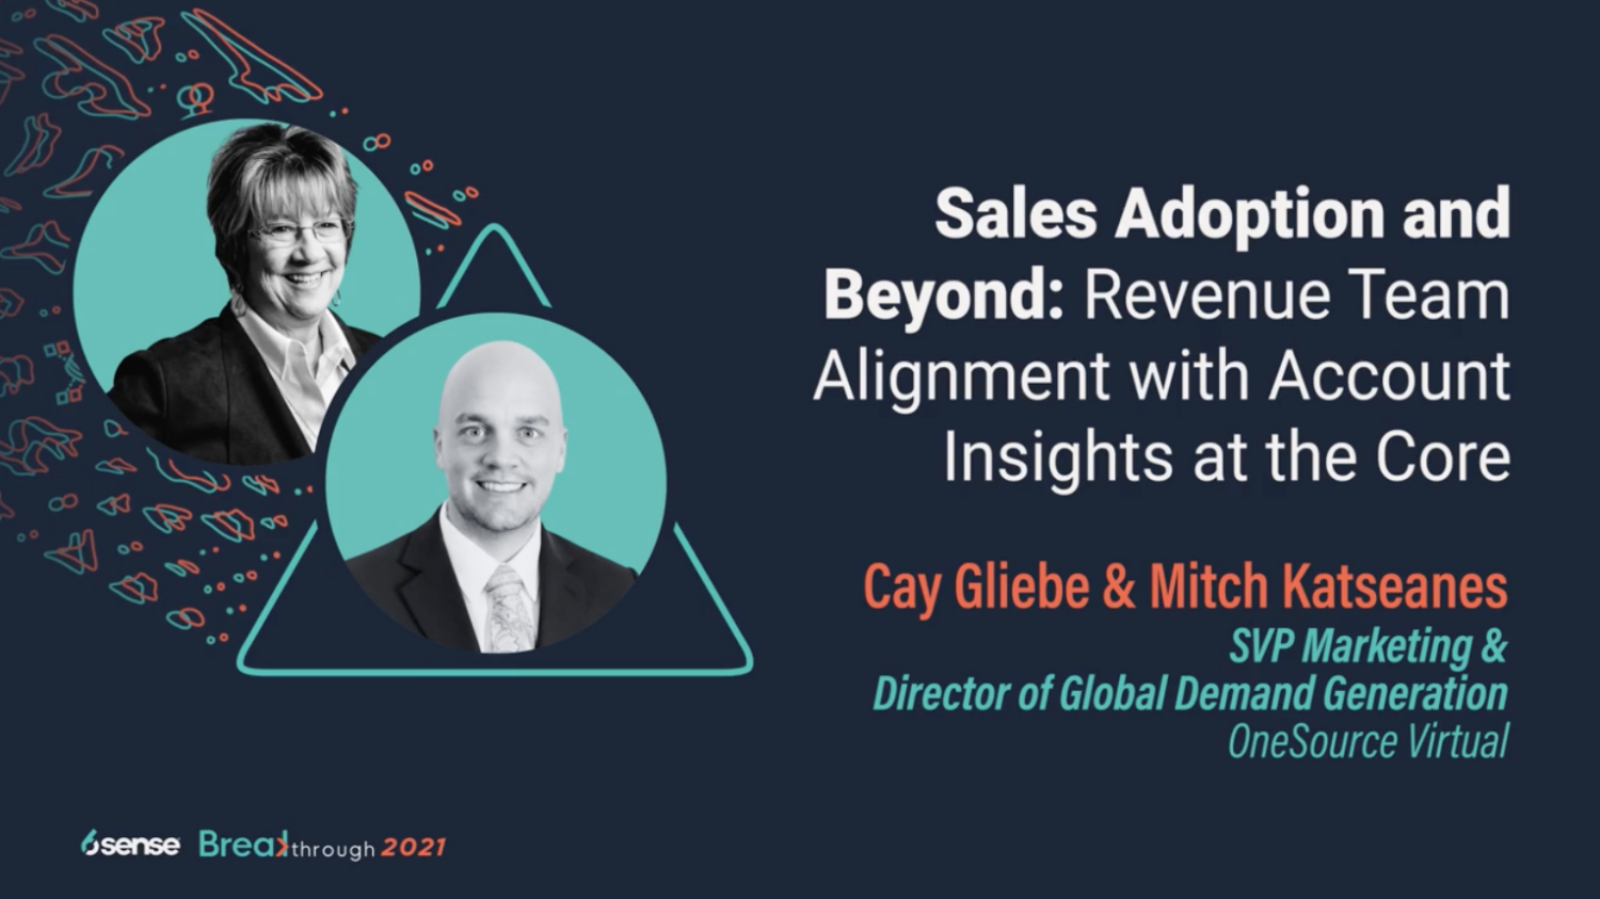 Sales Adoption and Beyond: Revenue Team Alignment with Account Insights at the Core